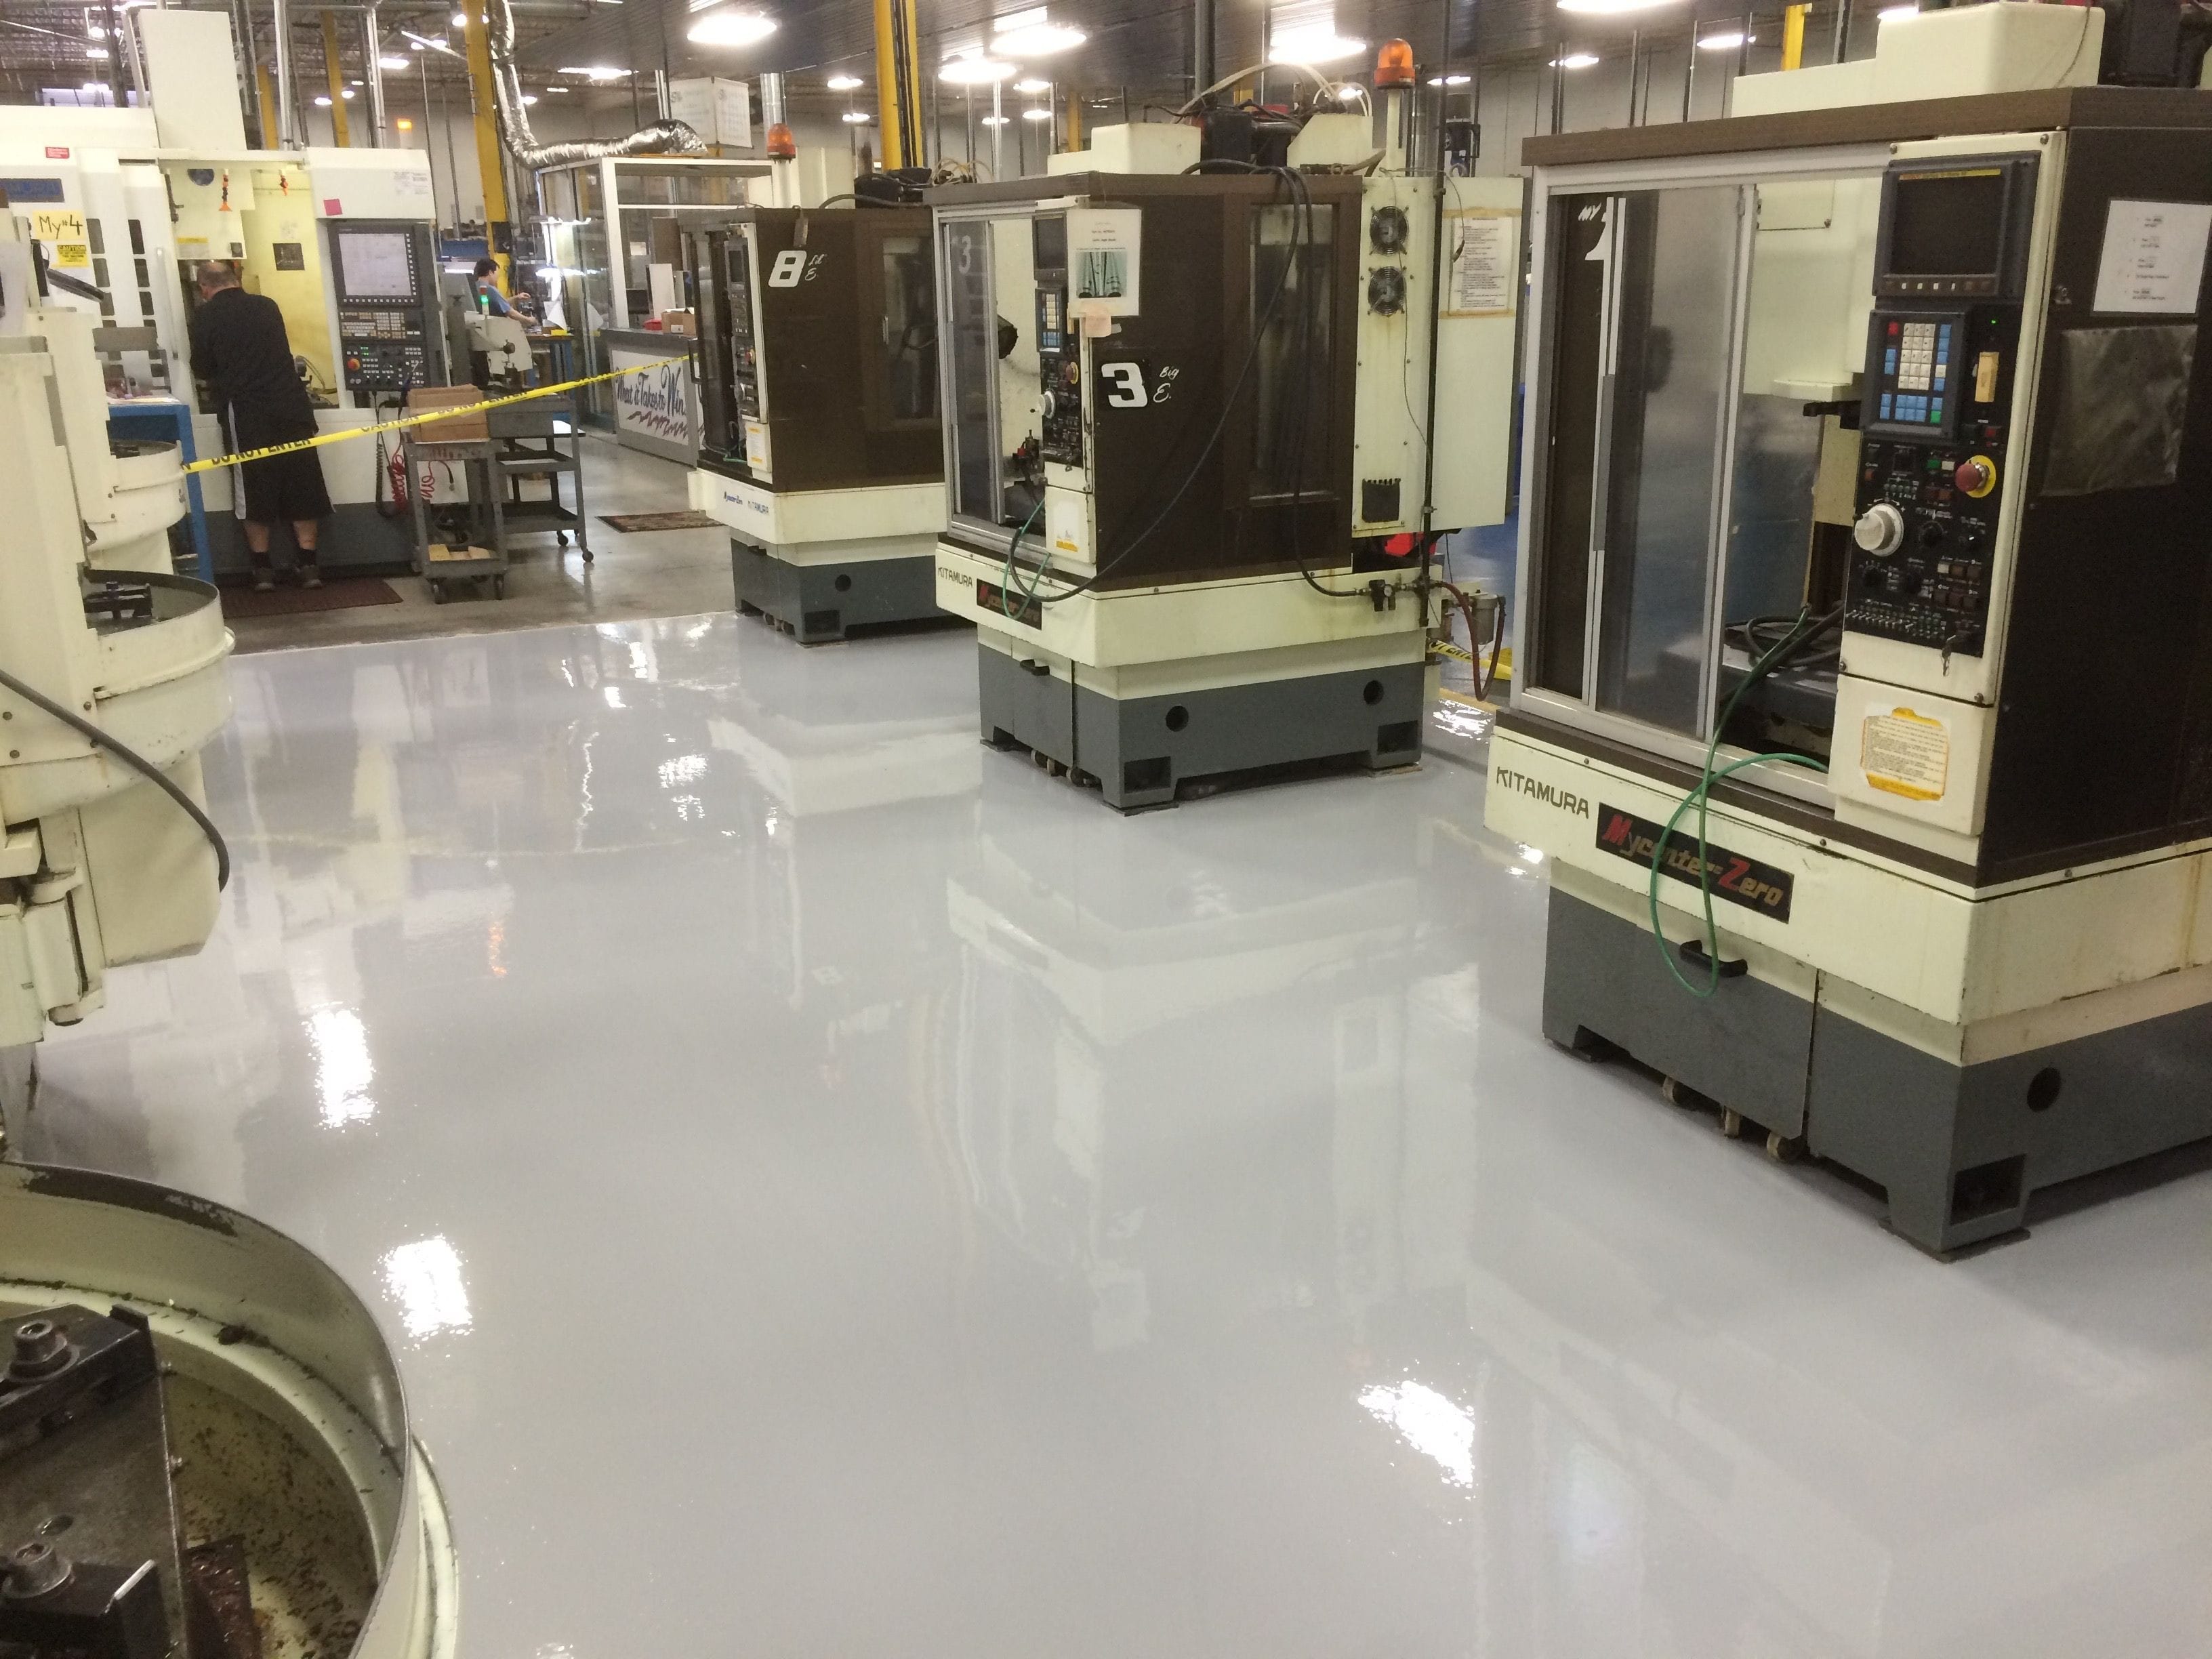 grey floor coating in a manufacturing environment